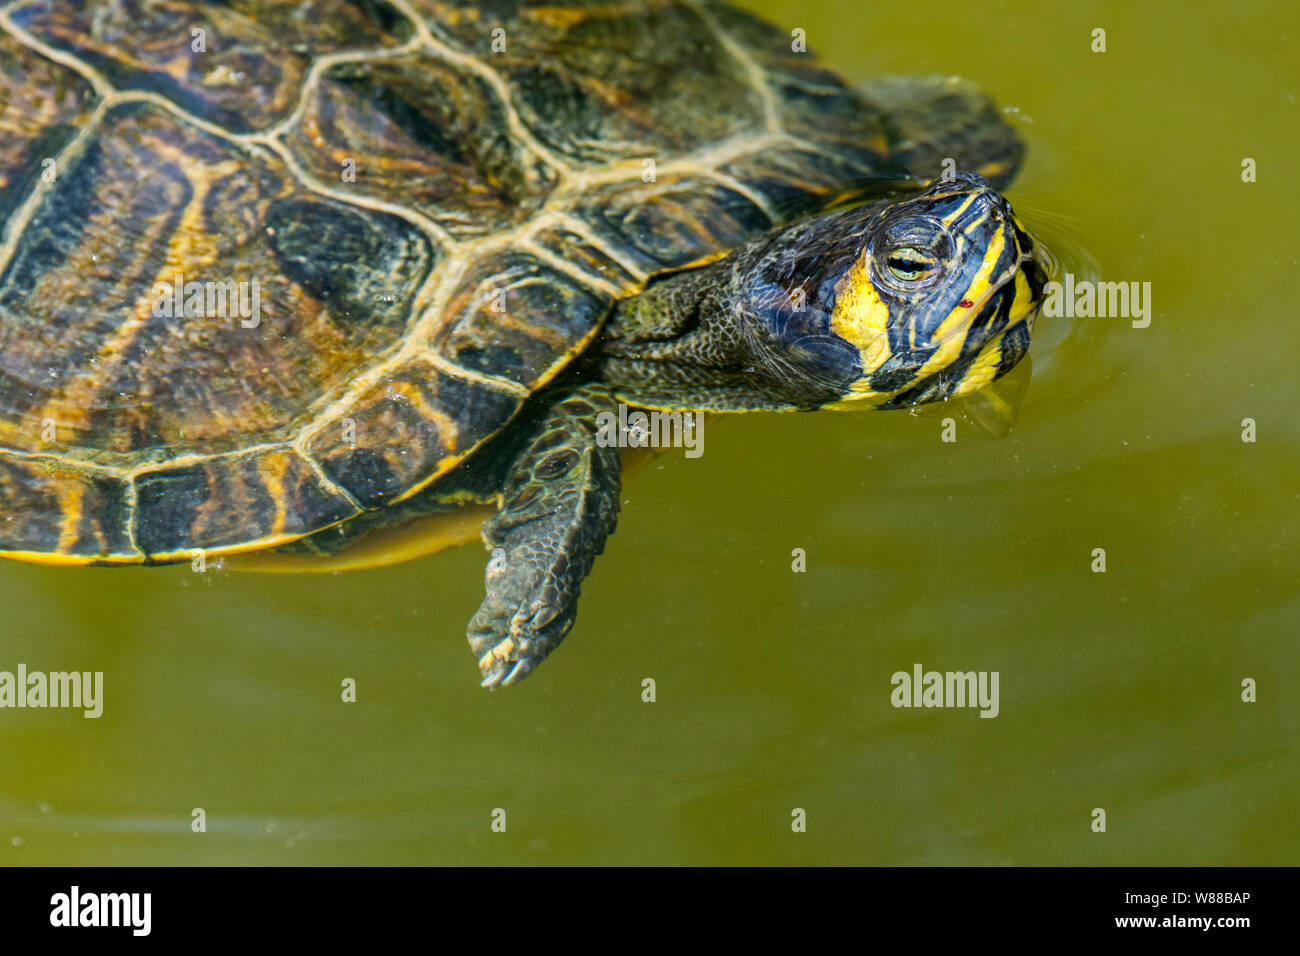 Yellow-bellied slider (Trachemys scripta scripta) swimming in pond, land and water turtle native to the southeastern United States Stock Photo